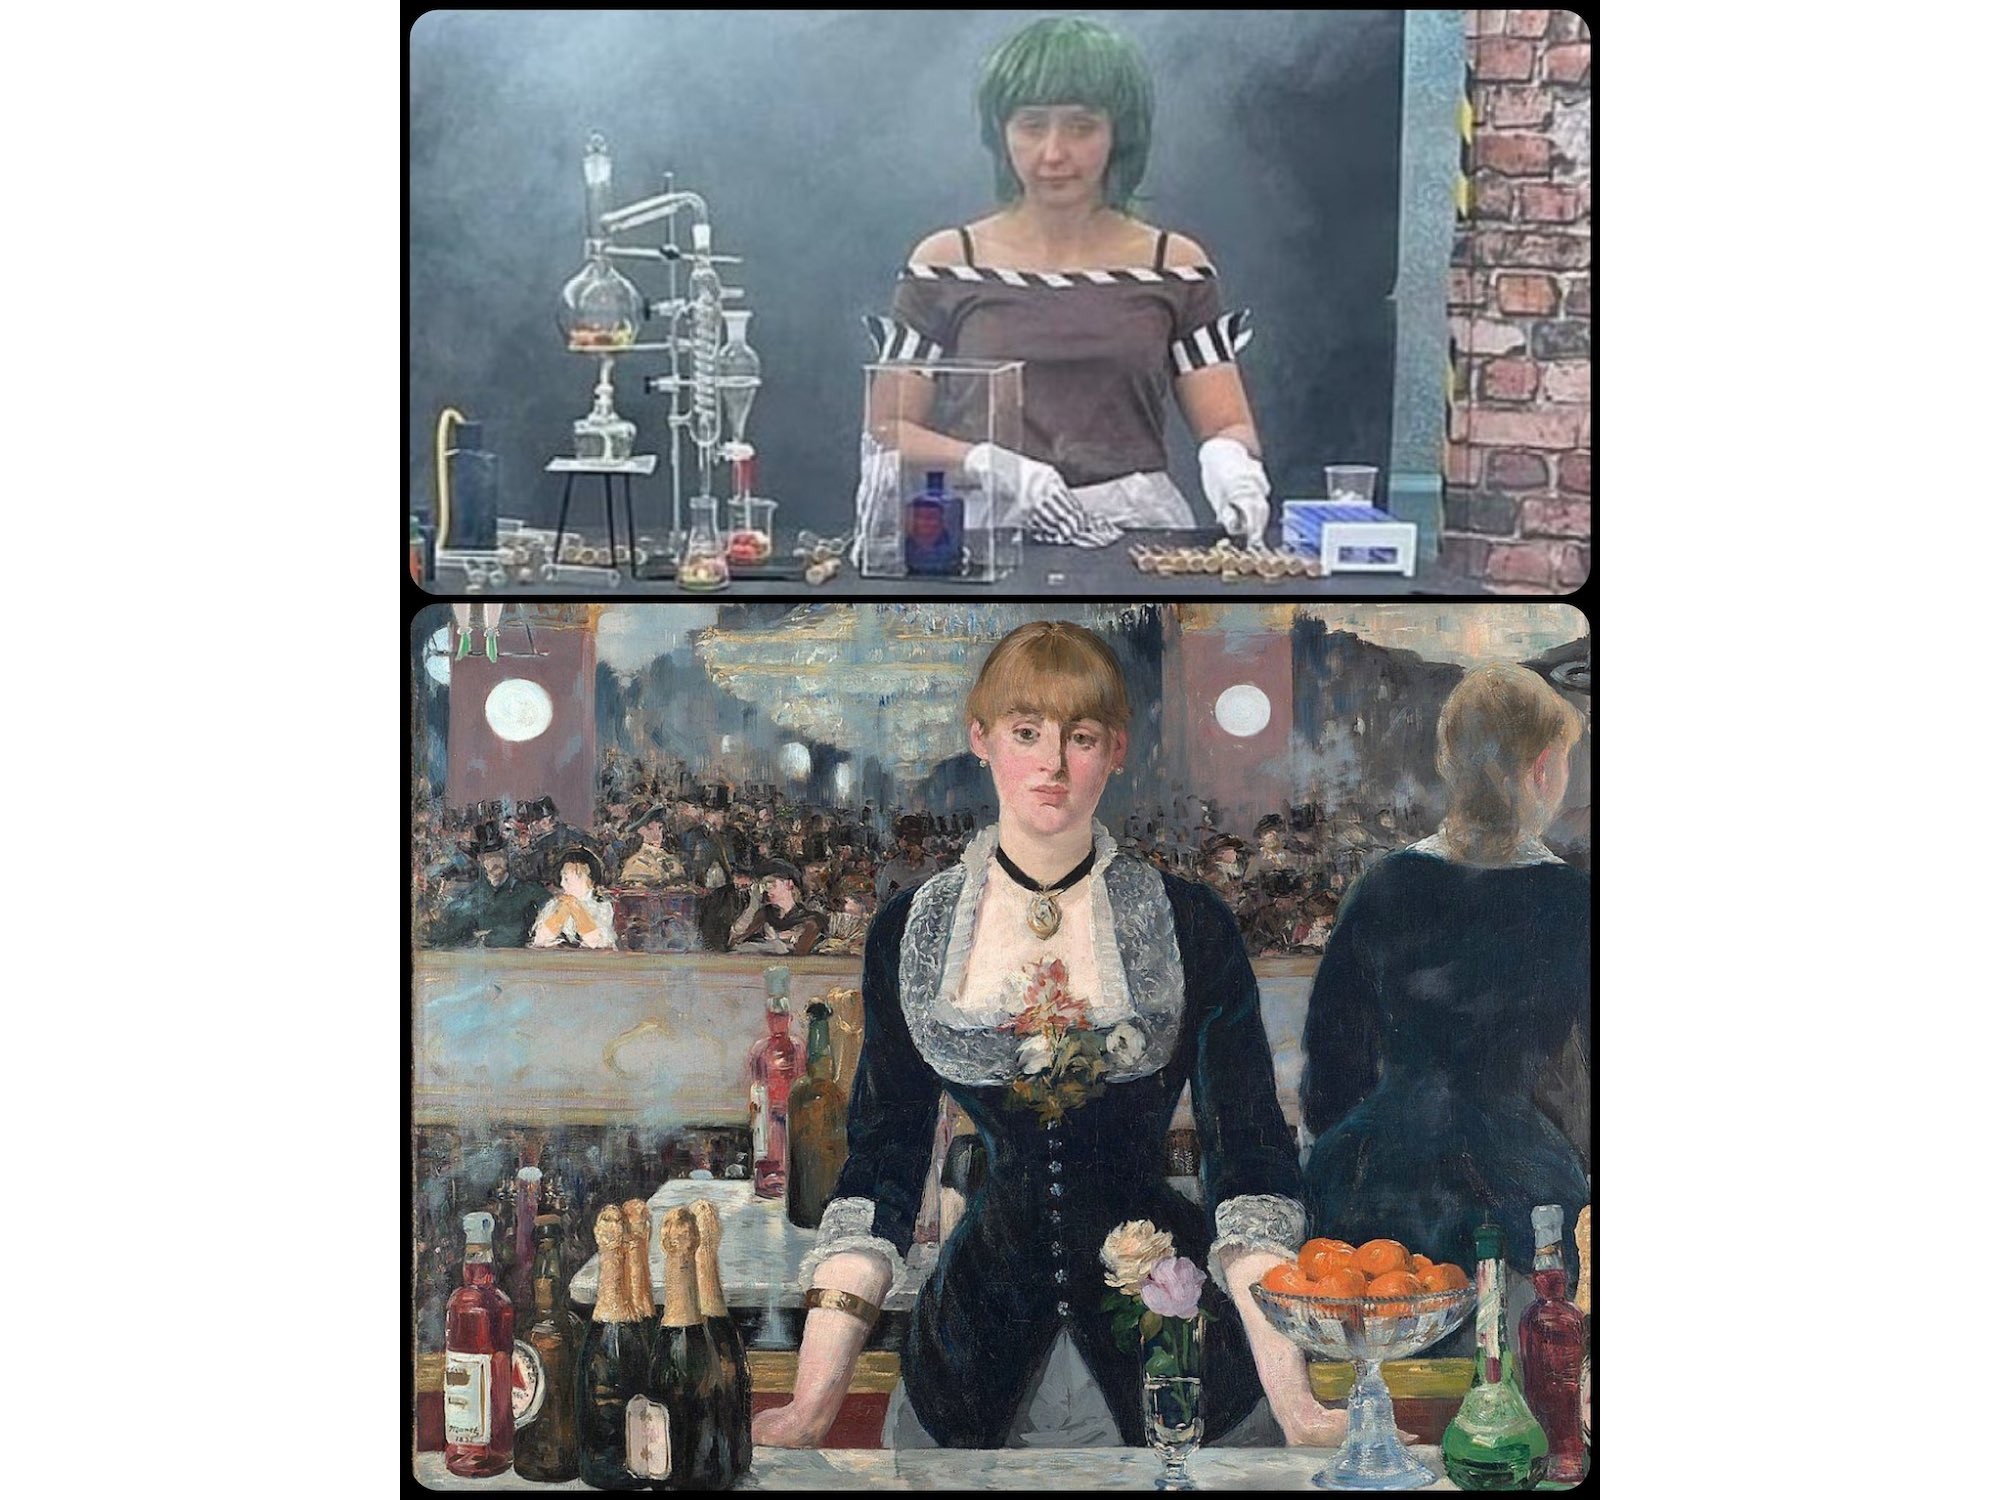 A diptych showing a woman with green hair at a chemistry table above a painting of a woman at a bar.